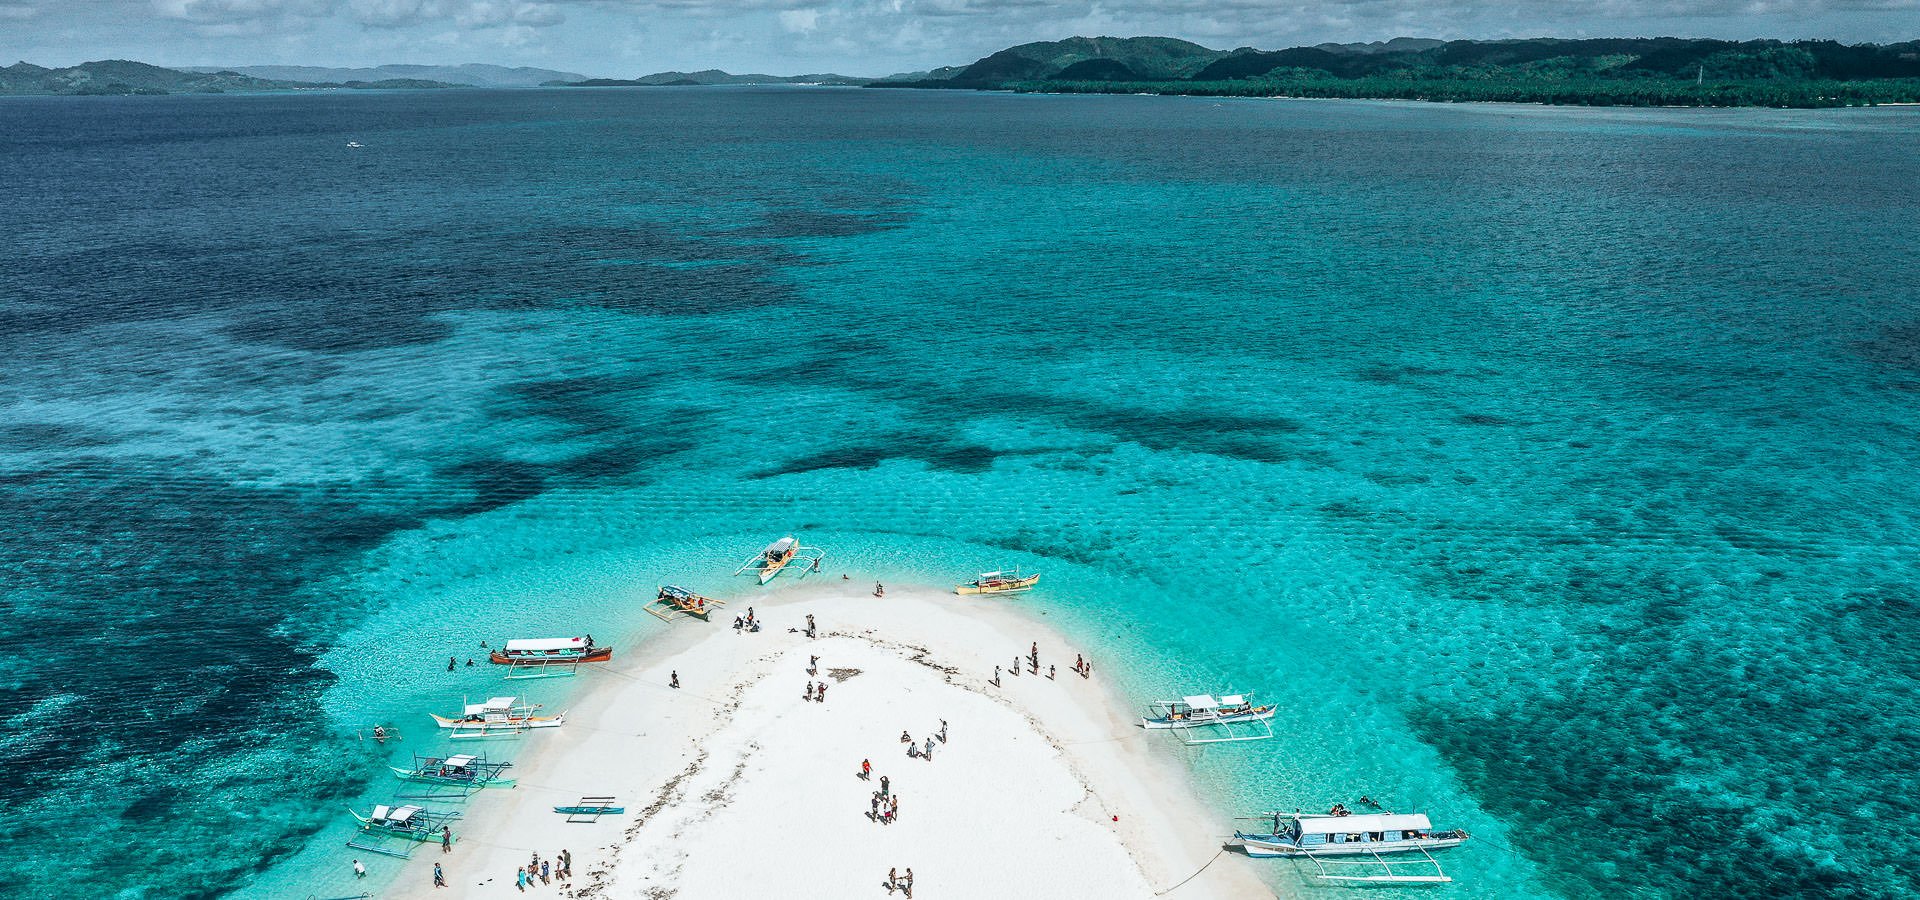 40 Stunning Photos That Will Make You Want To Visit The Philippines | island hopping in the philippines 2